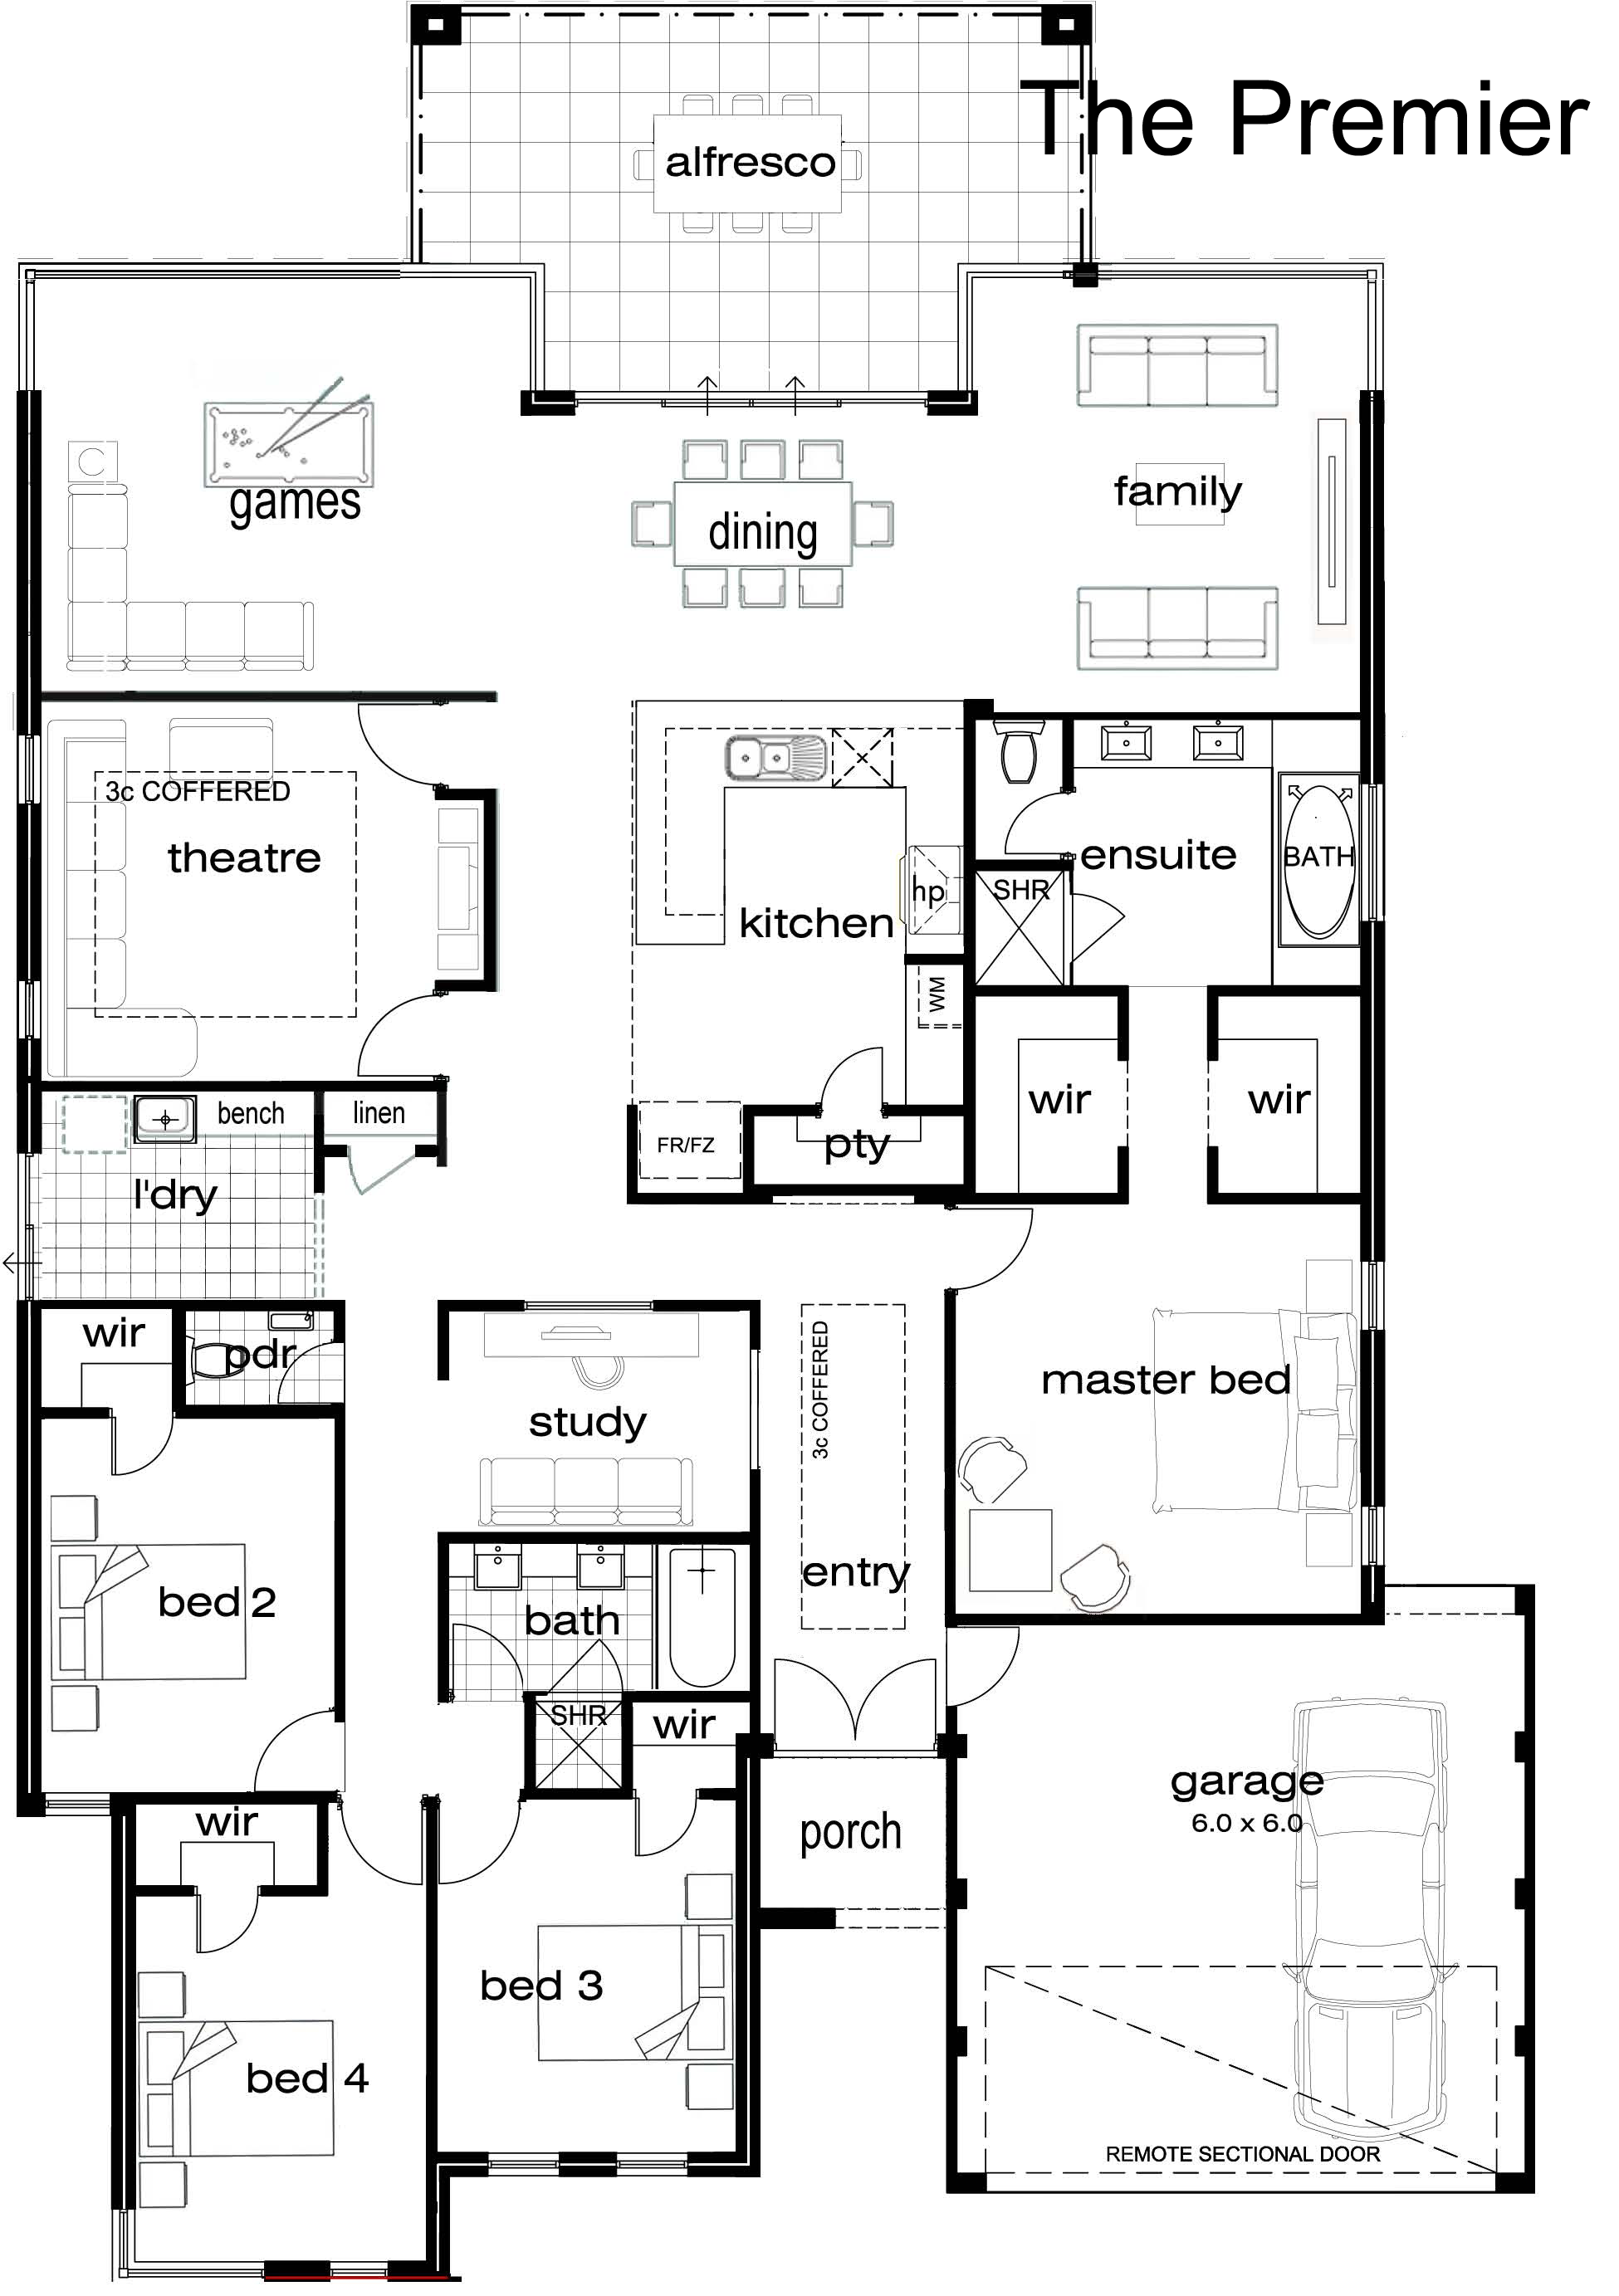 5 bedroom single story house plans bedroom at real estate